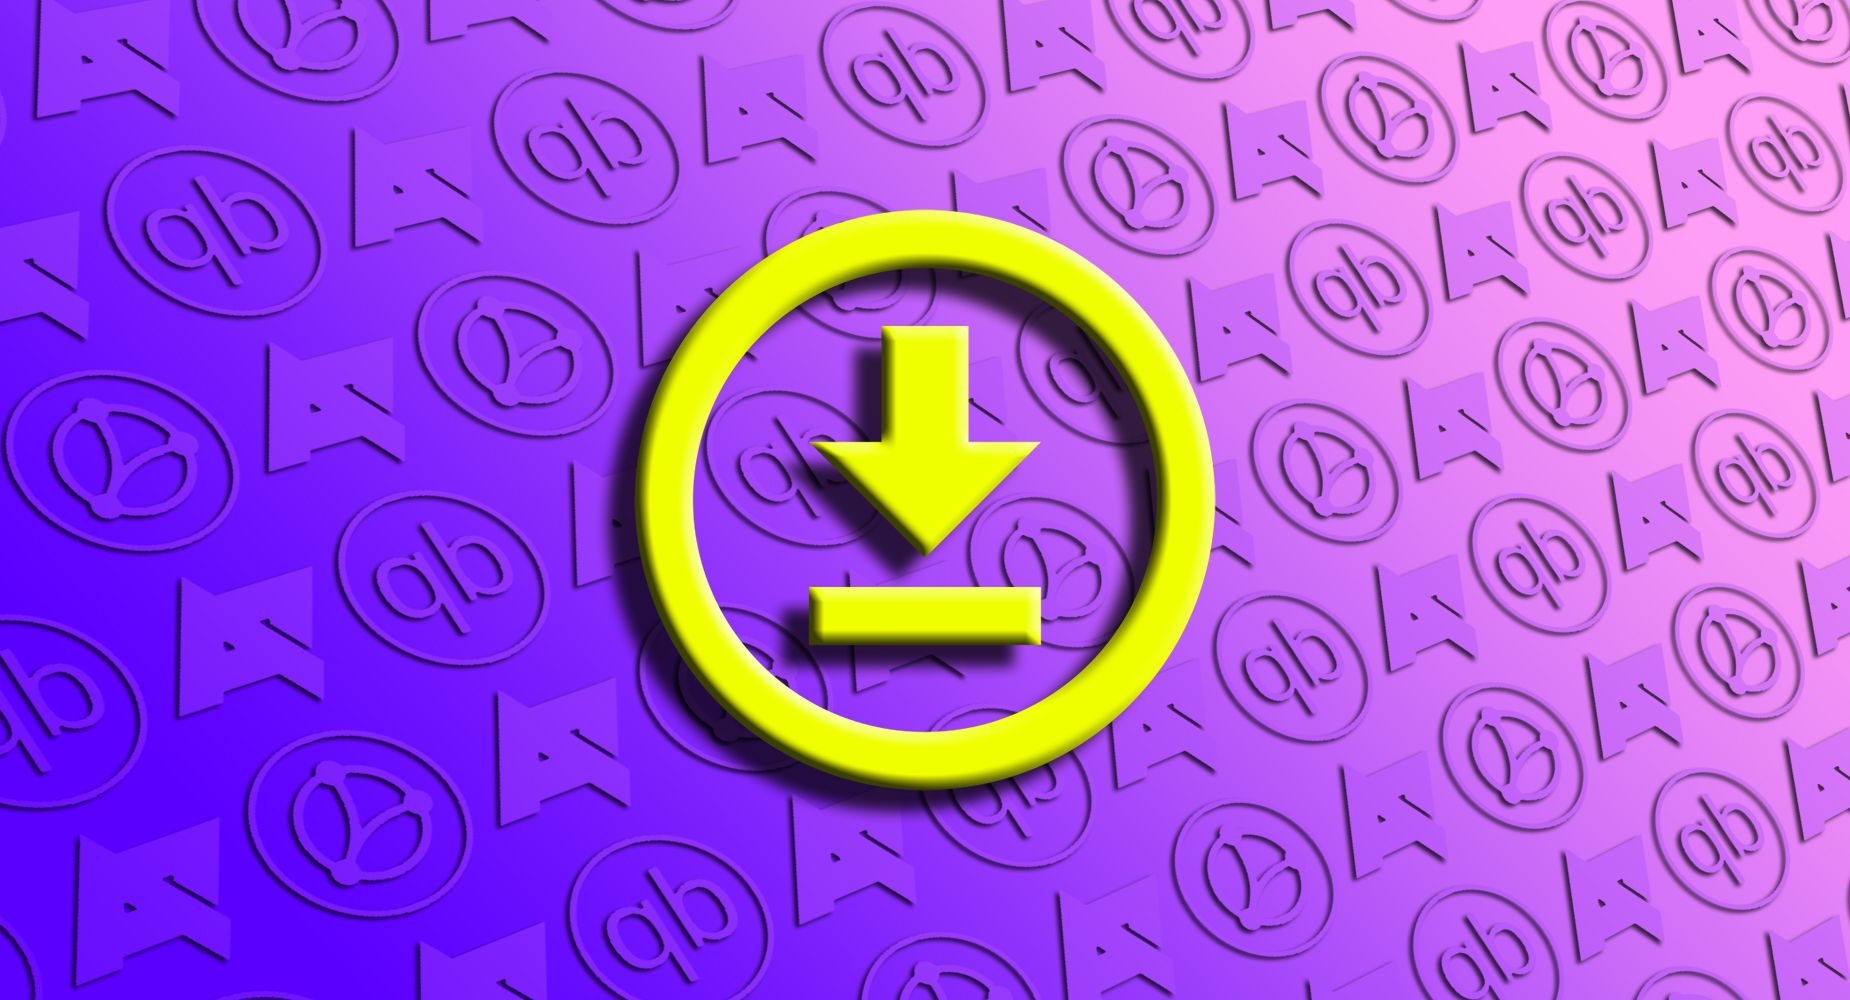 A download icon surrounded by a circle agains a purple background